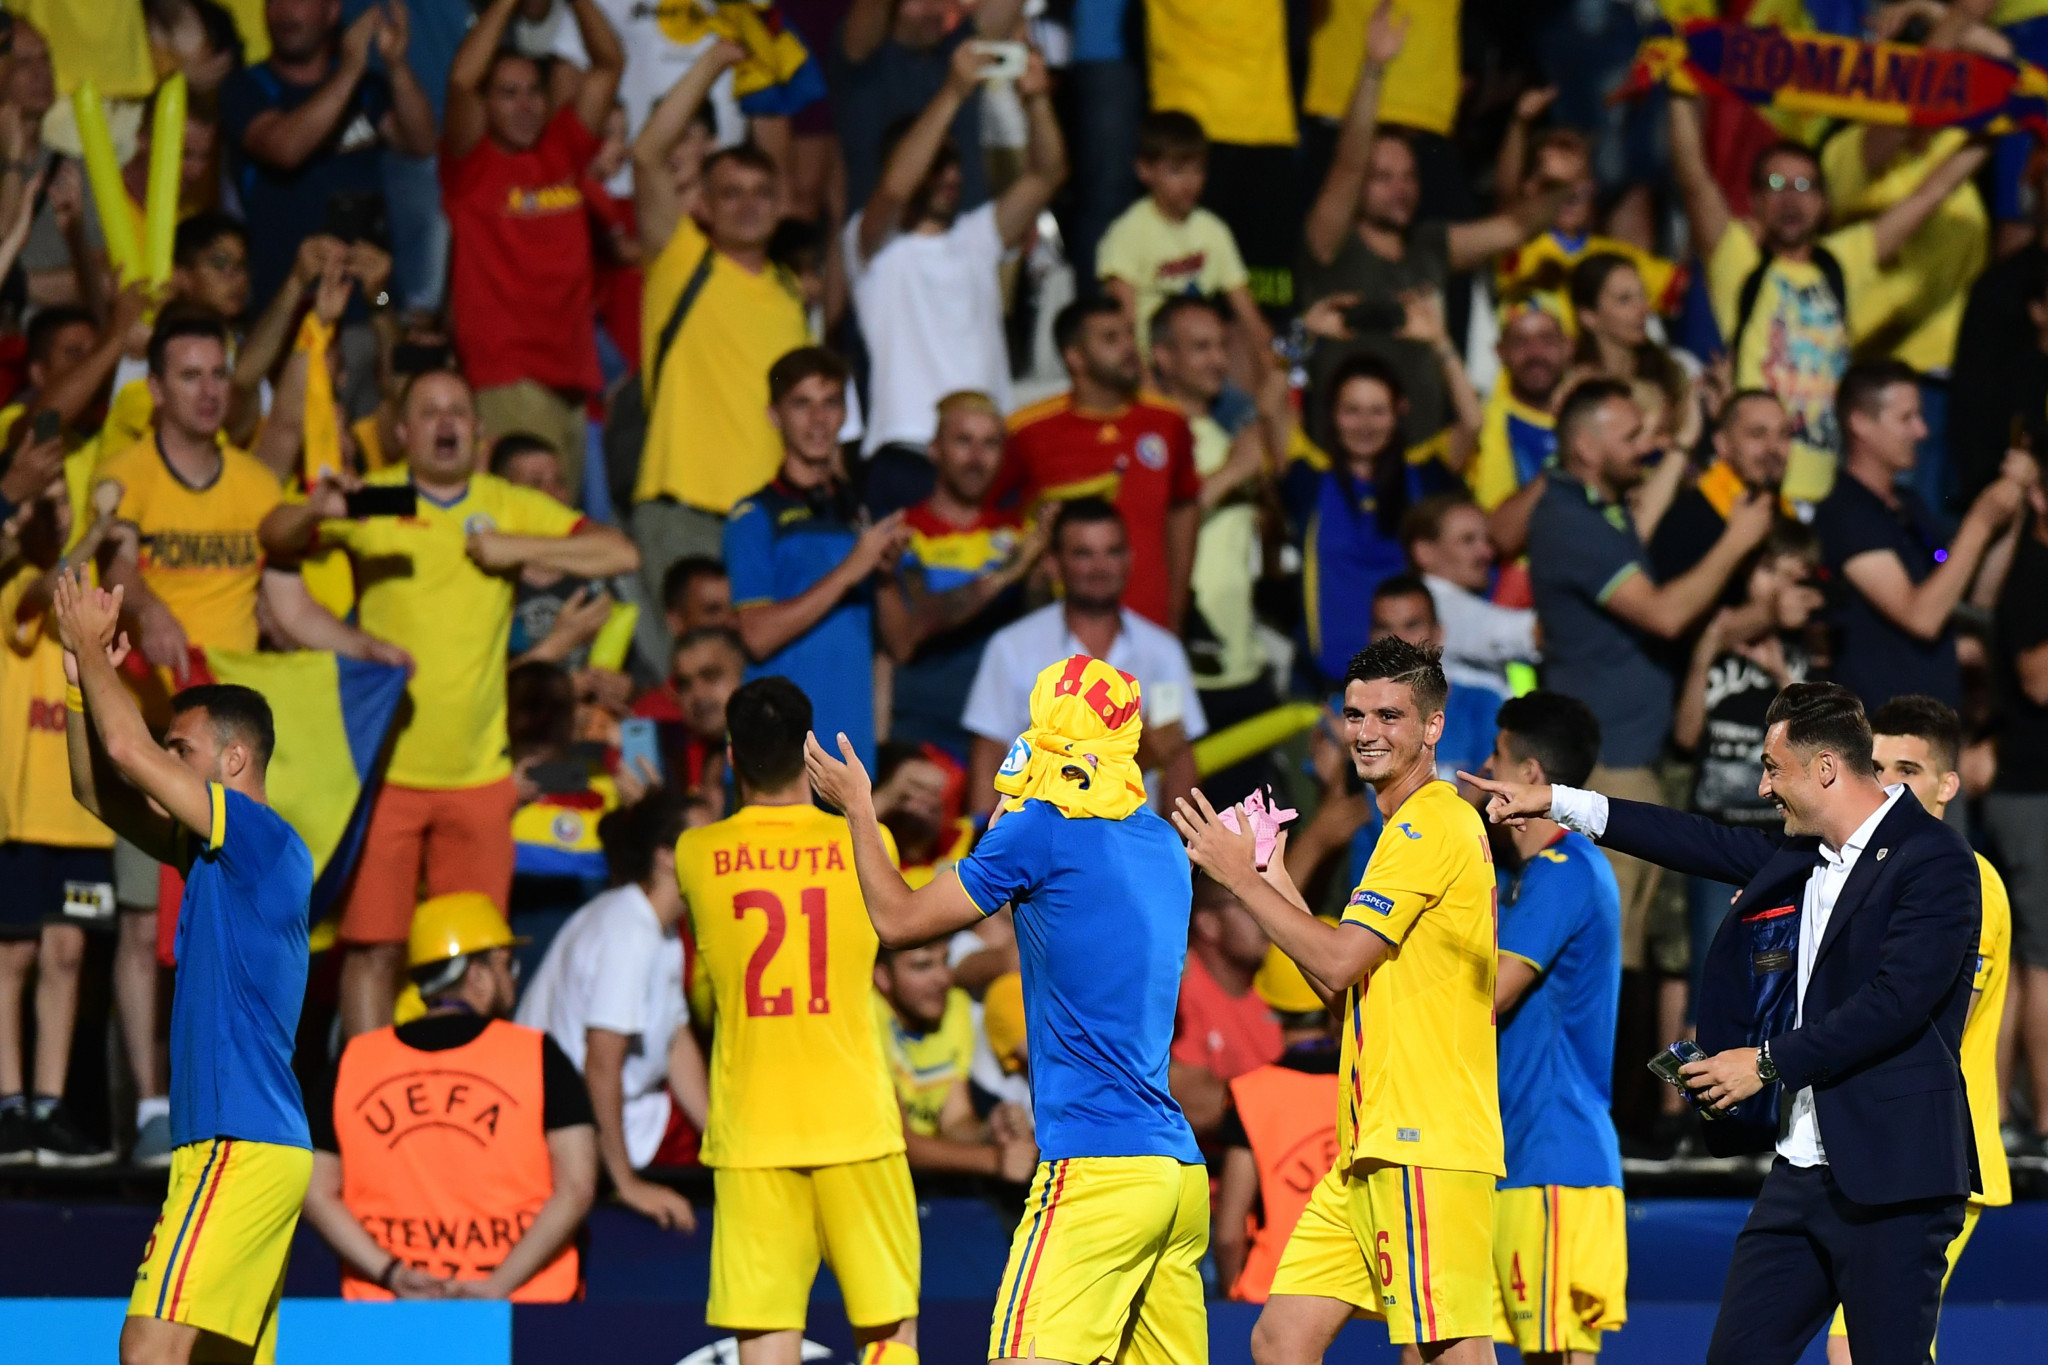 France and Romania both qualified for the semi-finals of the UEFA European Under-21 Championship after playing out a goalless draw in their last Group C match at Stadio Dino Manuzzi in Cesena ©Getty Images